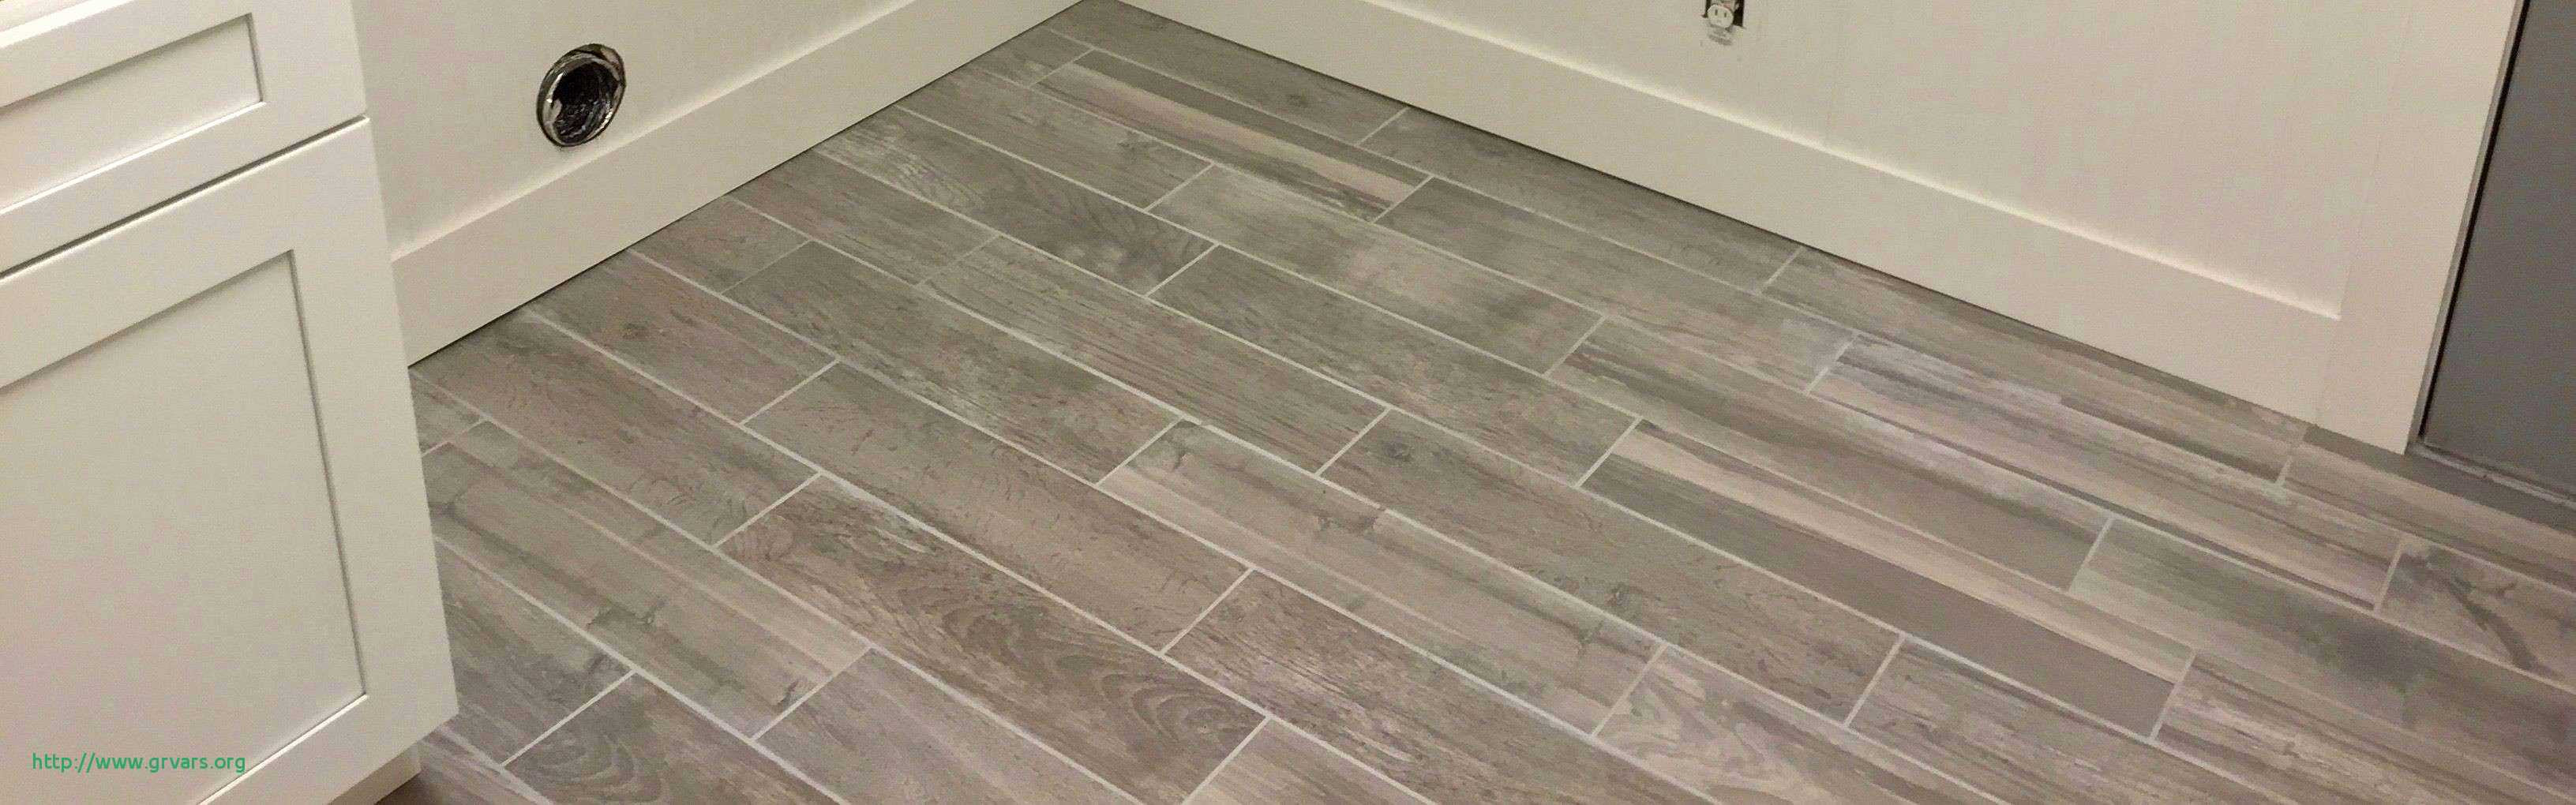 14 Awesome Best Product to Clean Hardwood Floors 2024 free download best product to clean hardwood floors of 22 meilleur de best way to scrub tile floors ideas blog intended for elegant unique bathroom tiling ideas best h sink install bathroom i 0d luxury sh